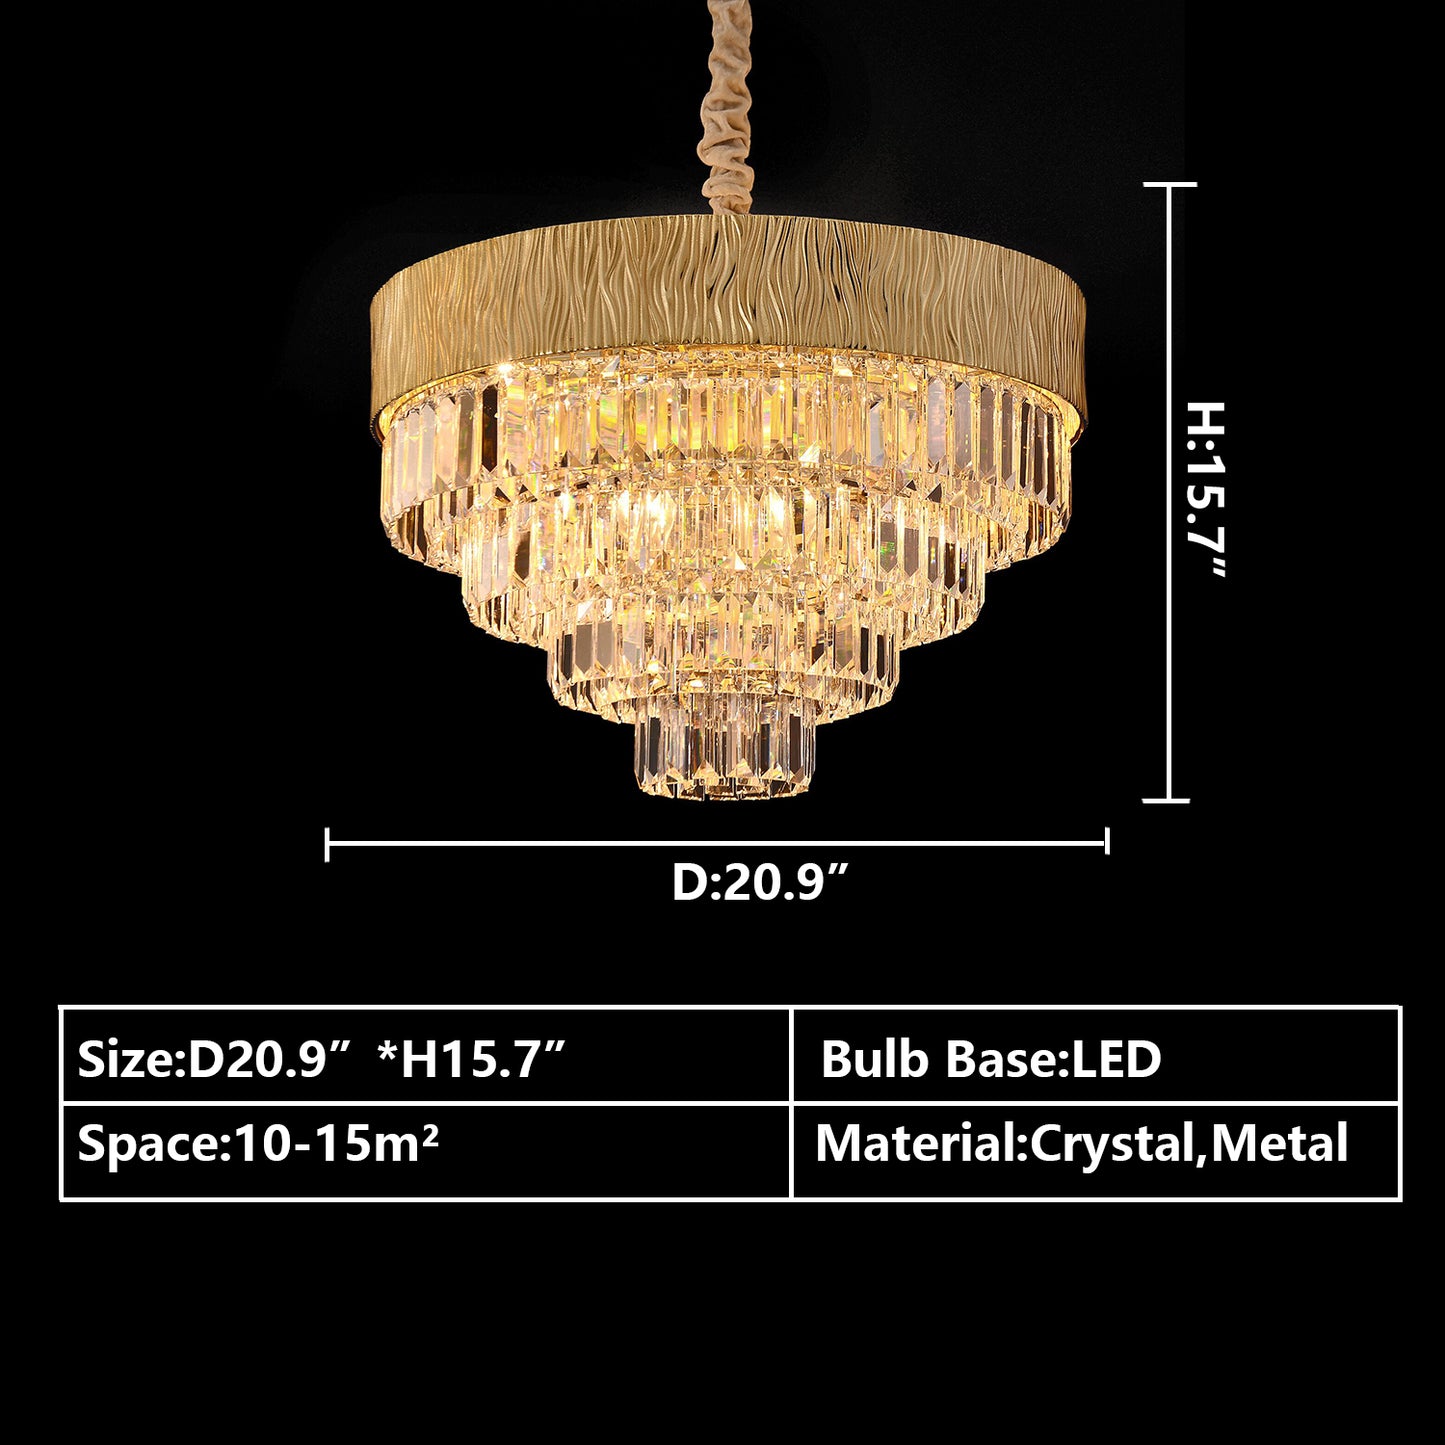 Round:D20.9"*H15.7" chandelier,chandeliers,light,lamp,pendant,round,oval,tiers,layers,multi-tier,multi-layer,gold,luxury,light luxury,ceiling,chain,crystal,metal,living room,dining room,bedroom,dining table,bar,hallway